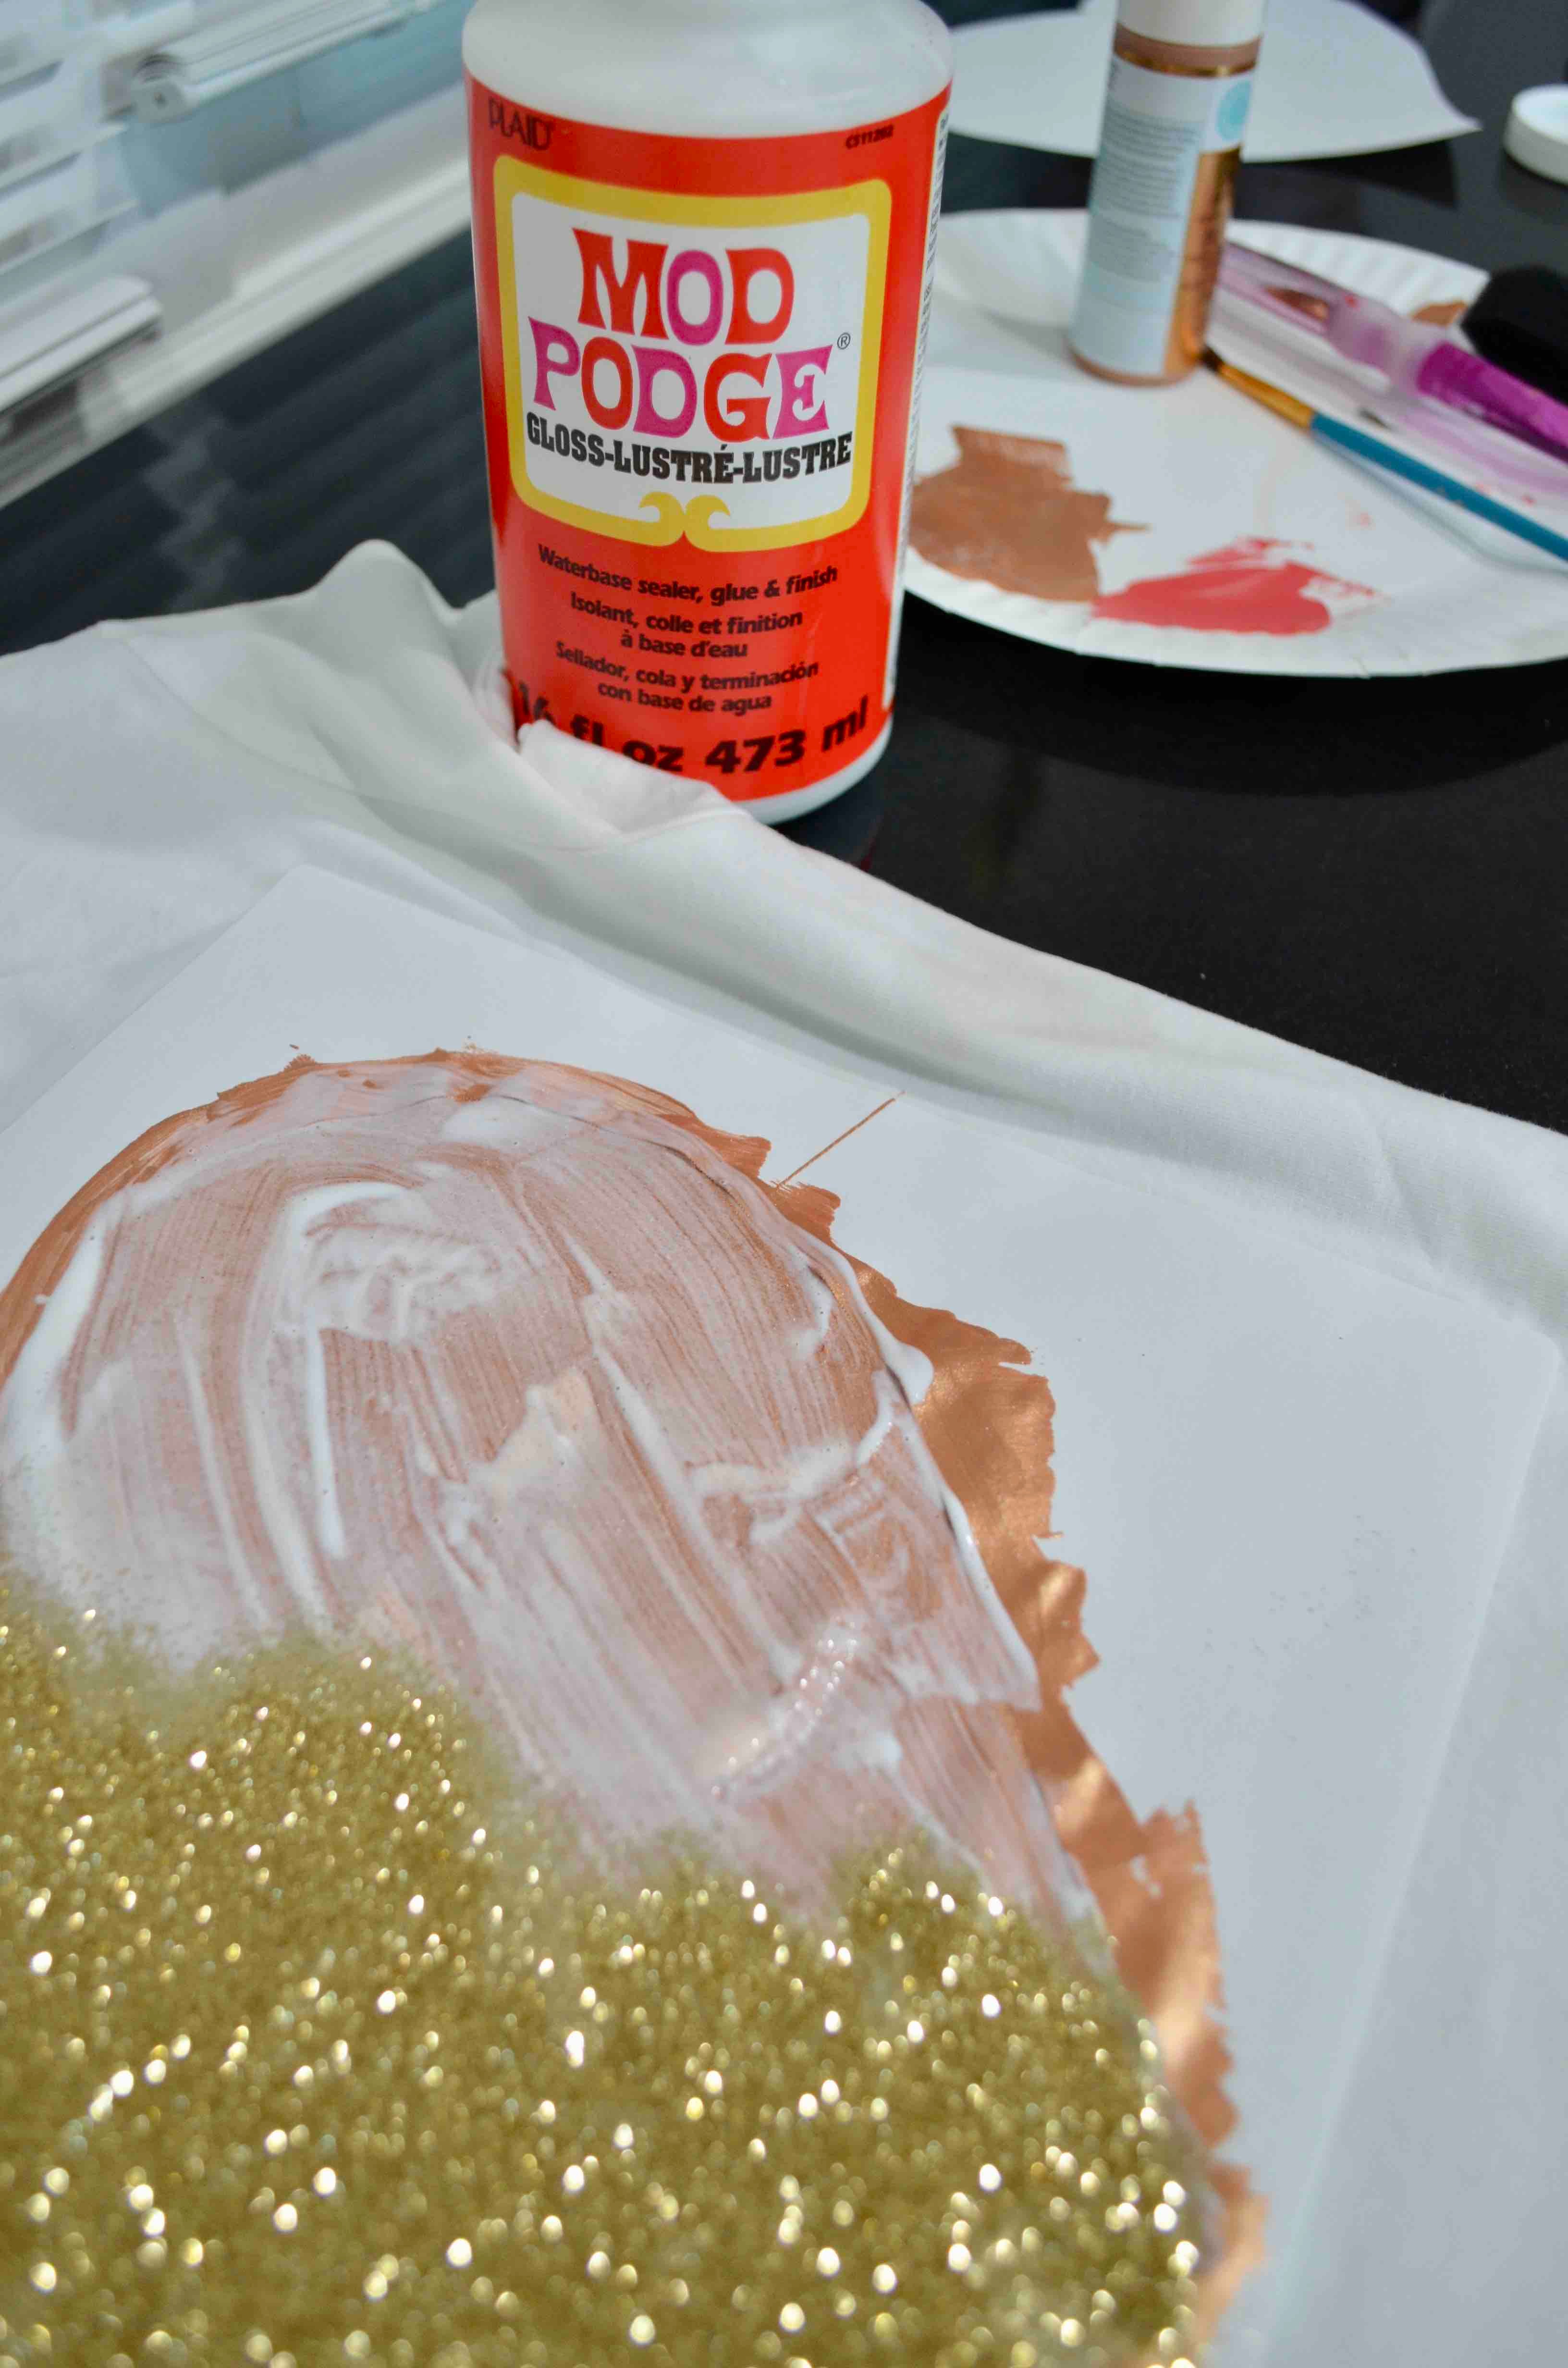 DIY Painted Clothes for Valentine's Day 